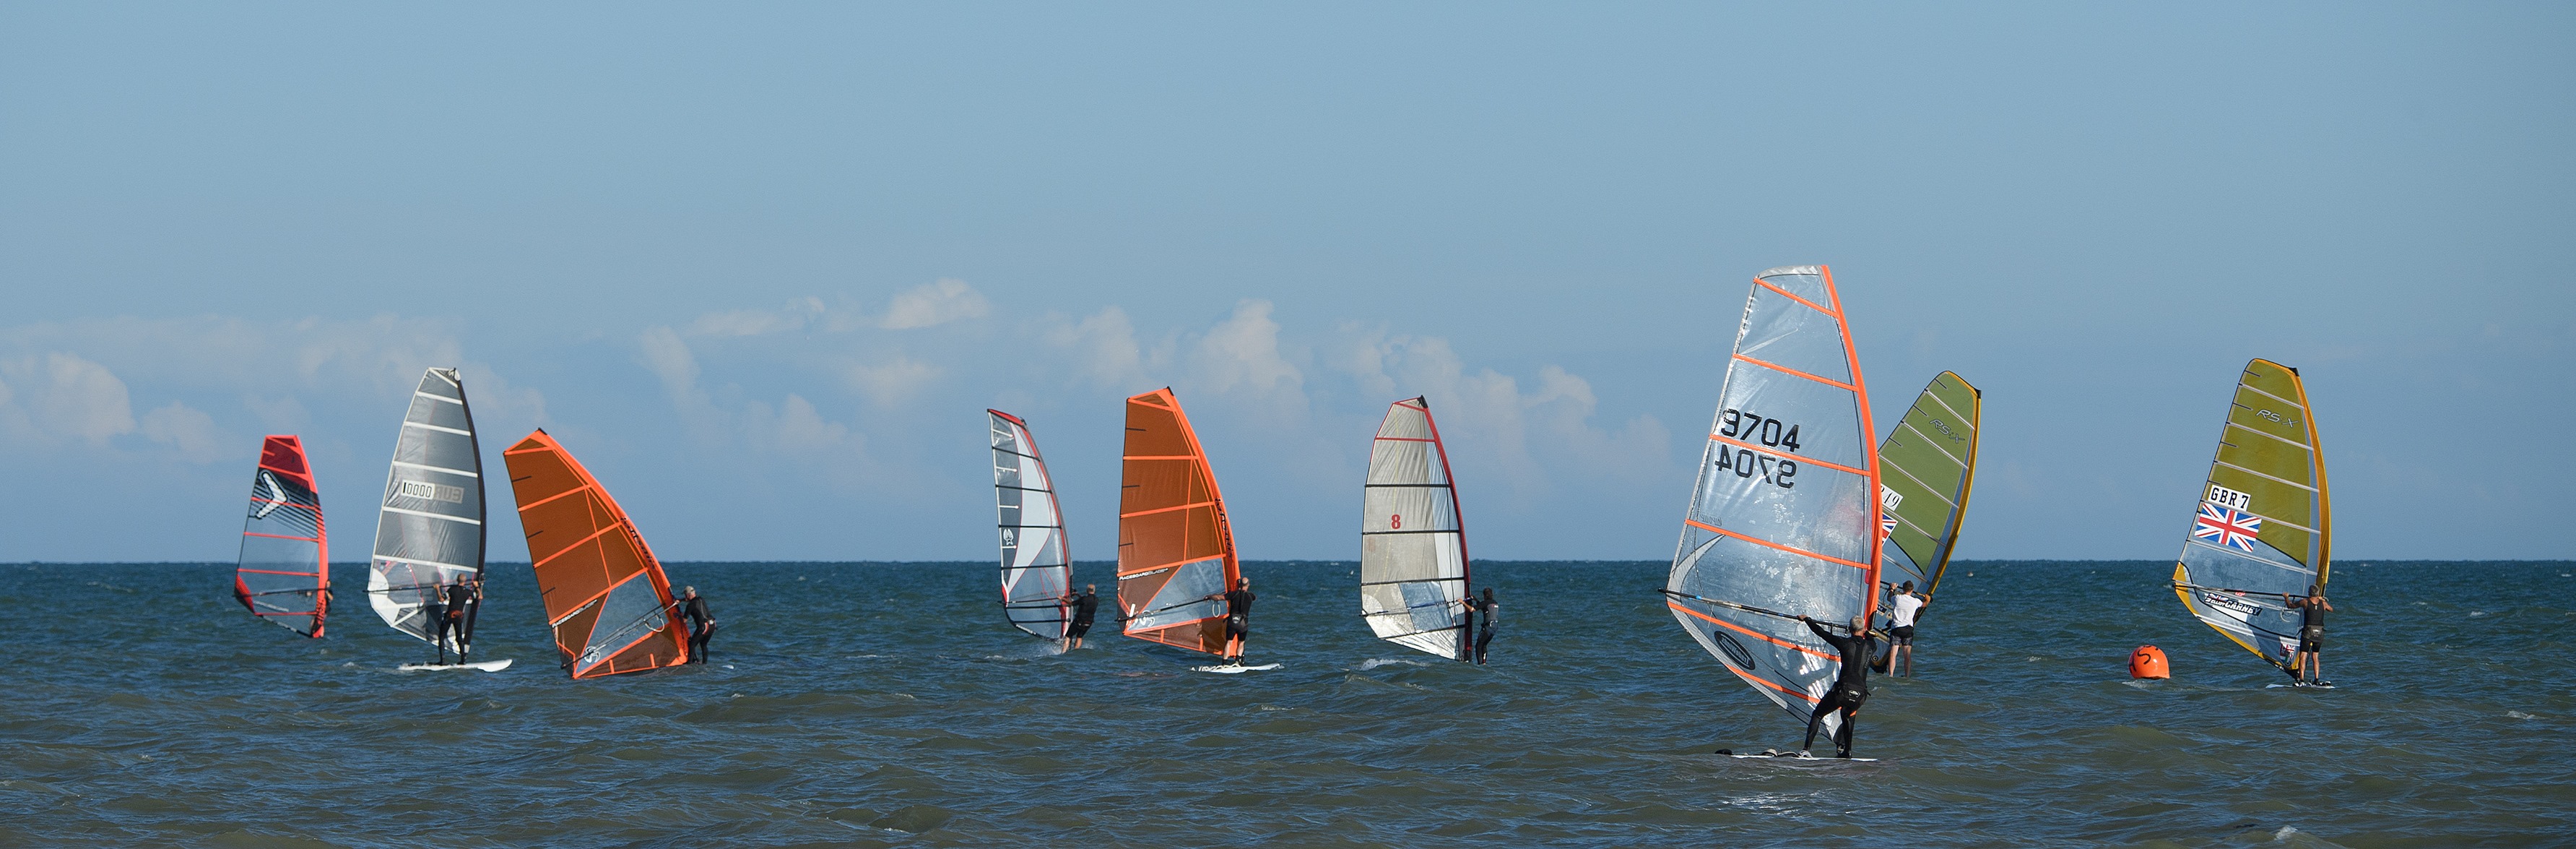 Hythe and Saltwood Sailing Club